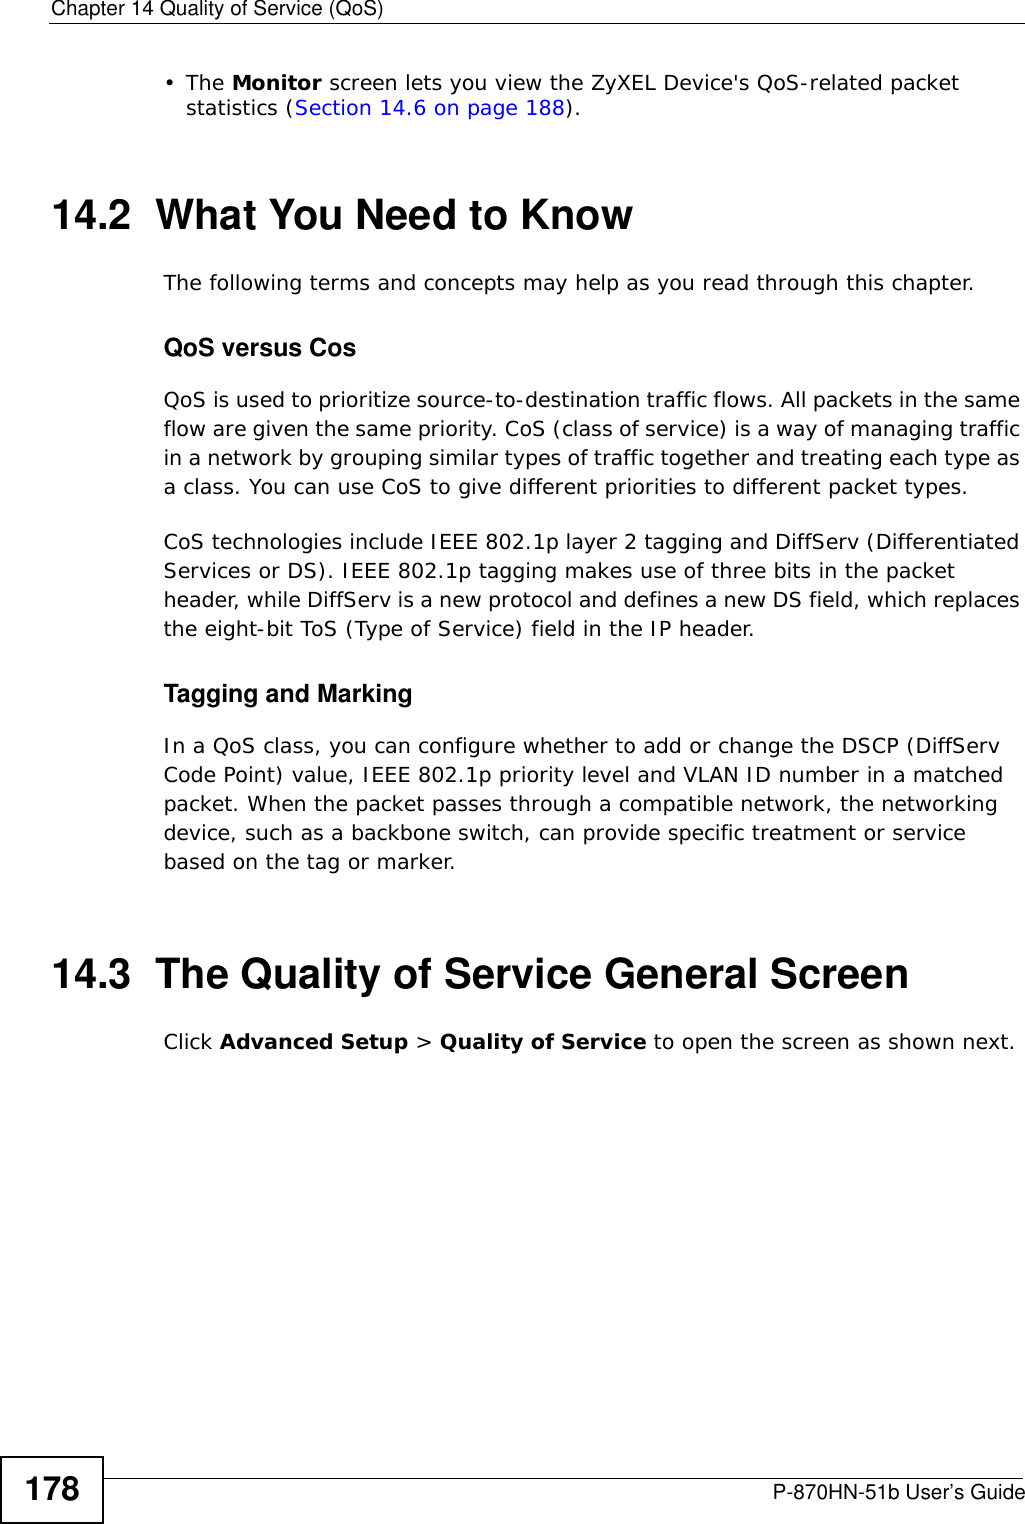 Chapter 14 Quality of Service (QoS)P-870HN-51b User’s Guide178•The Monitor screen lets you view the ZyXEL Device&apos;s QoS-related packet statistics (Section 14.6 on page 188).14.2  What You Need to KnowThe following terms and concepts may help as you read through this chapter.QoS versus CosQoS is used to prioritize source-to-destination traffic flows. All packets in the same flow are given the same priority. CoS (class of service) is a way of managing traffic in a network by grouping similar types of traffic together and treating each type as a class. You can use CoS to give different priorities to different packet types. CoS technologies include IEEE 802.1p layer 2 tagging and DiffServ (Differentiated Services or DS). IEEE 802.1p tagging makes use of three bits in the packet header, while DiffServ is a new protocol and defines a new DS field, which replaces the eight-bit ToS (Type of Service) field in the IP header. Tagging and MarkingIn a QoS class, you can configure whether to add or change the DSCP (DiffServ Code Point) value, IEEE 802.1p priority level and VLAN ID number in a matched packet. When the packet passes through a compatible network, the networking device, such as a backbone switch, can provide specific treatment or service based on the tag or marker.14.3  The Quality of Service General Screen Click Advanced Setup &gt; Quality of Service to open the screen as shown next. 